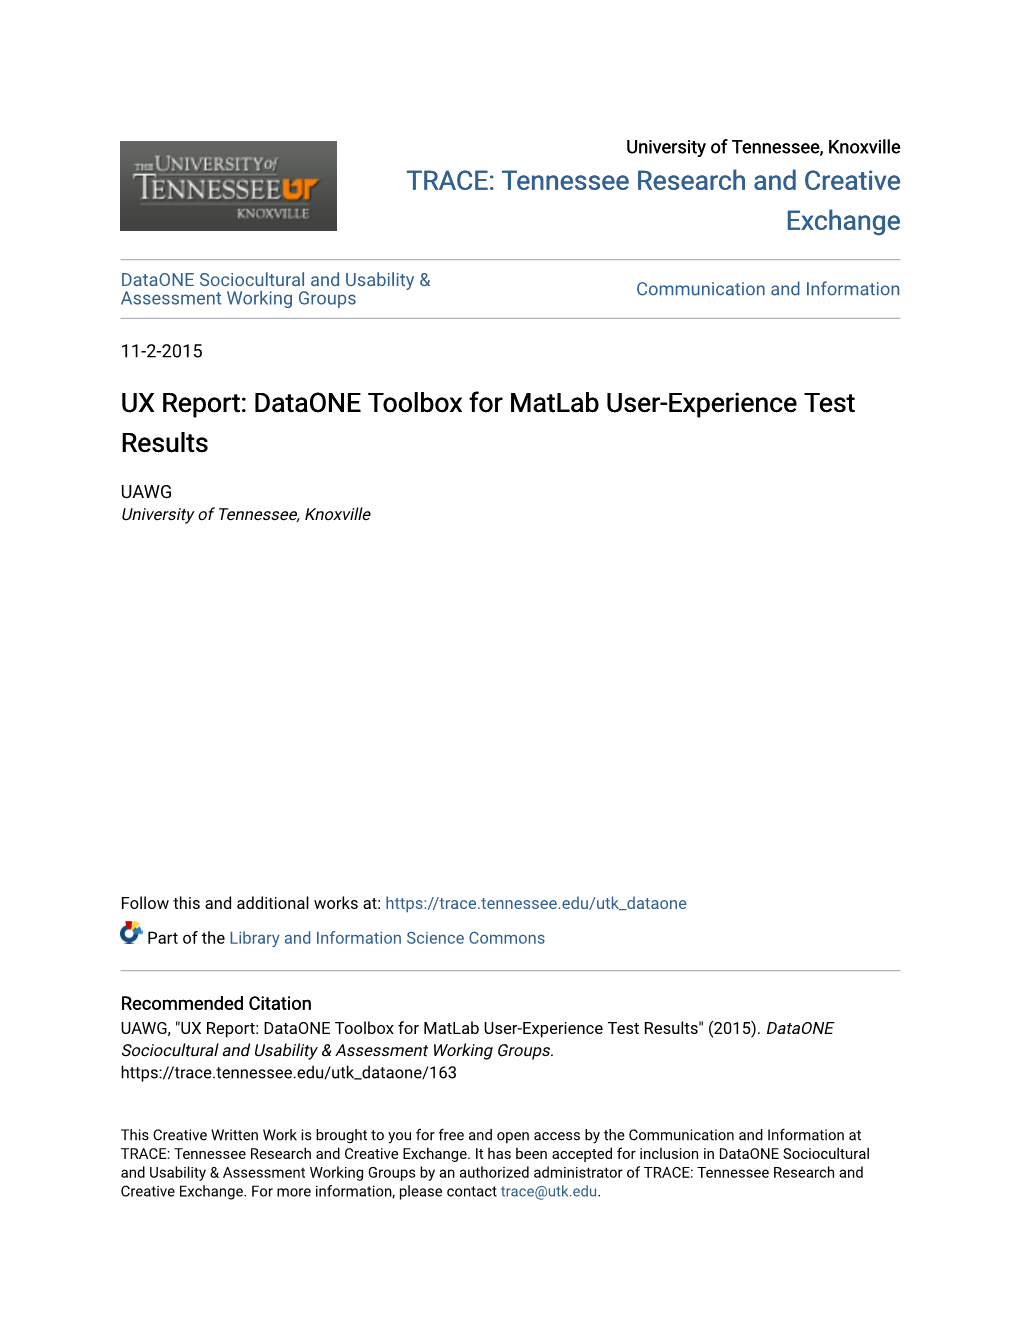 UX Report: Dataone Toolbox for Matlab User-Experience Test Results